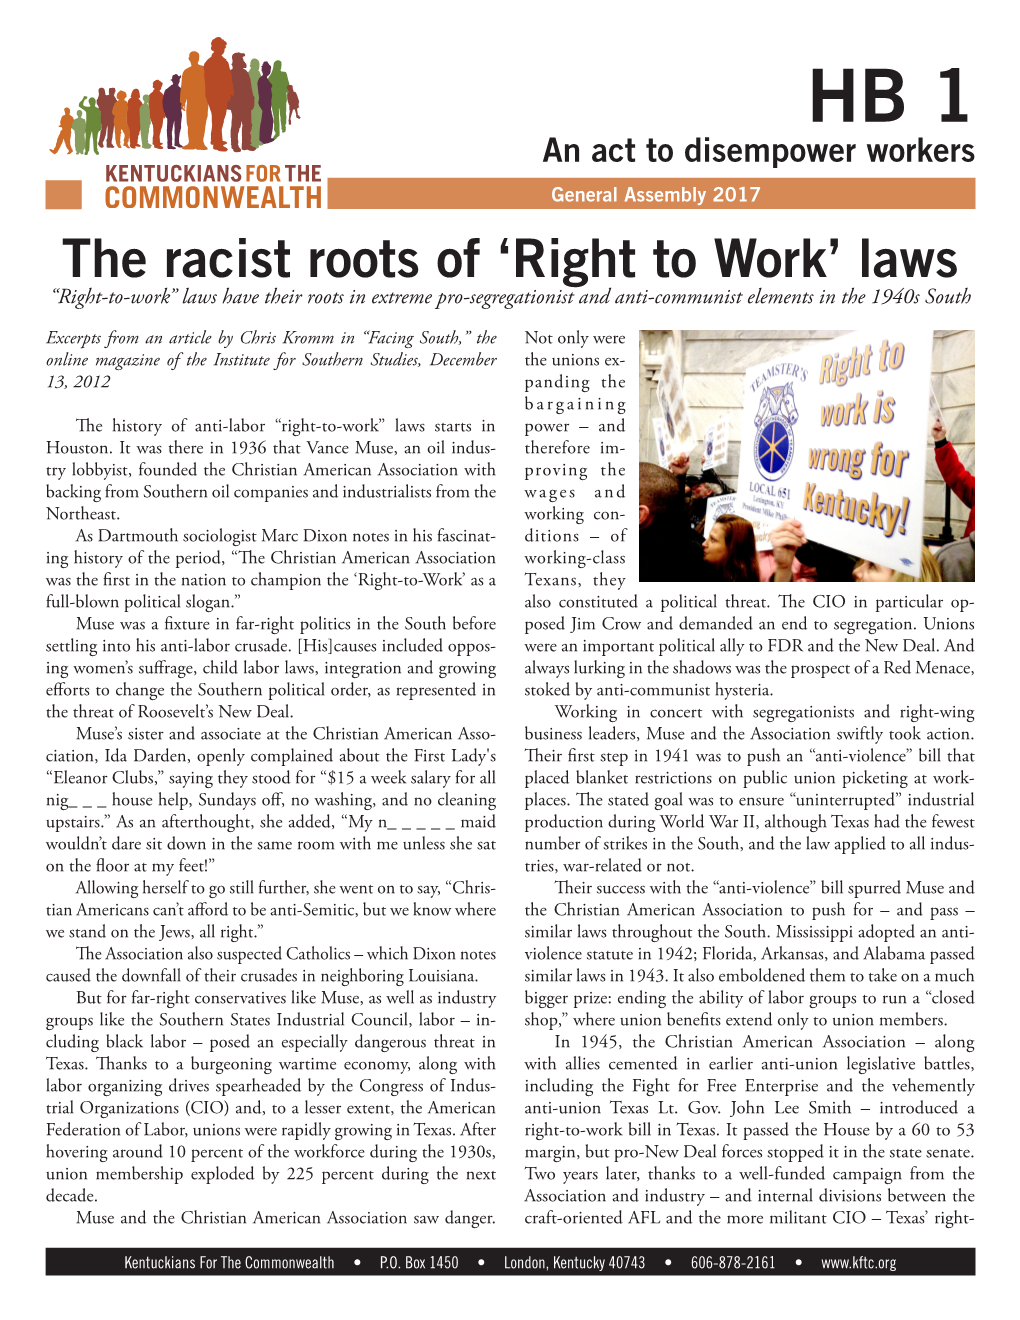 The Racist Roots of ‘Right to Work’ Laws “Right-To-Work” Laws Have Their Roots in Extreme Pro-Segregationist and Anti-Communist Elements in the 1940S South